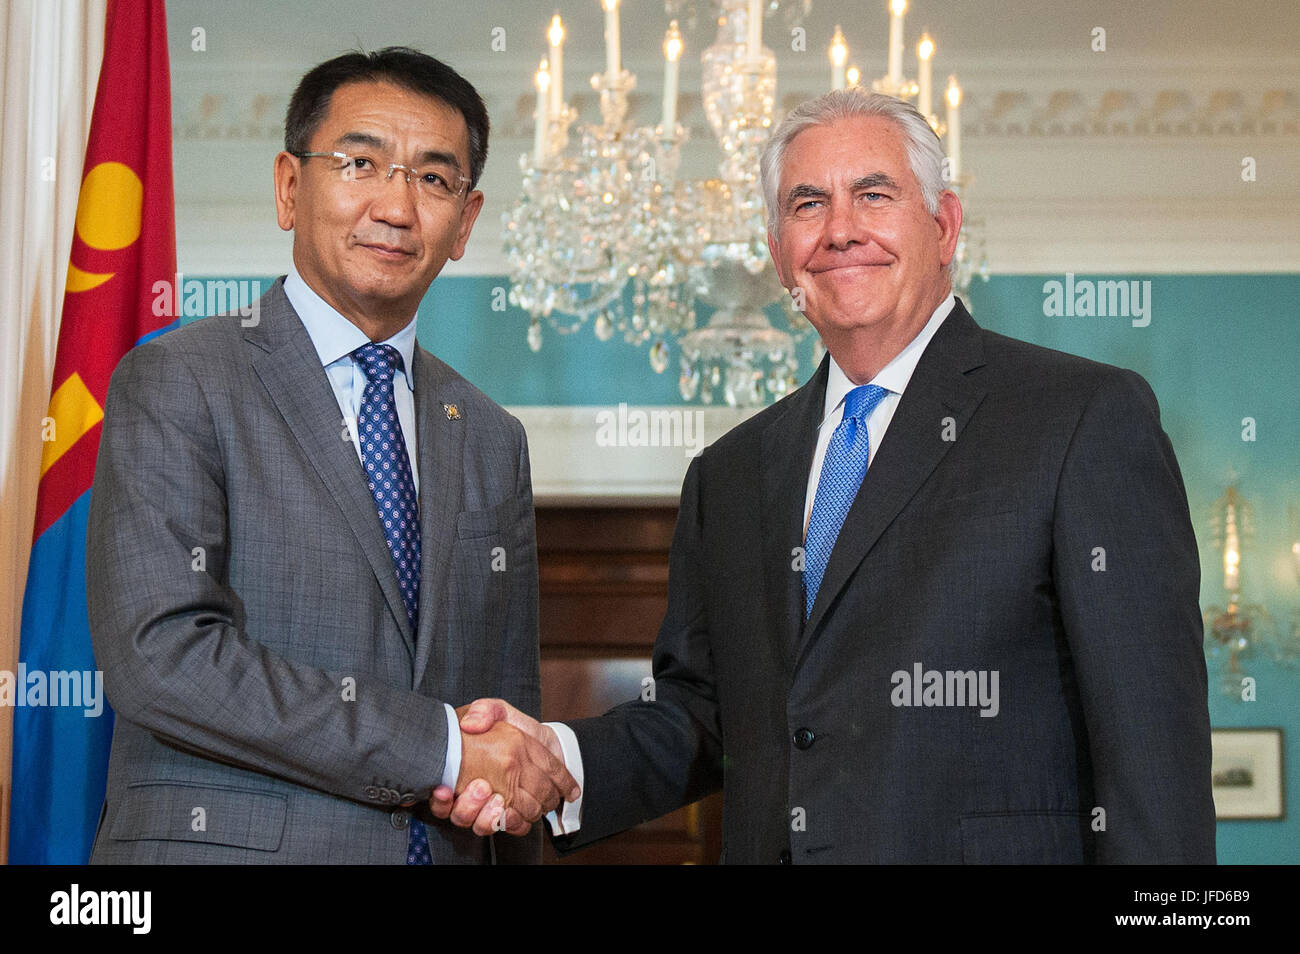 U.S. Secretary of State Rex Tillerson and Mongolian Foreign Minister Tsend Munkh-Orgil shake hands before their meeting at the U.S. Department of State in Washington, D.C., on June 13, 2017. Stock Photo